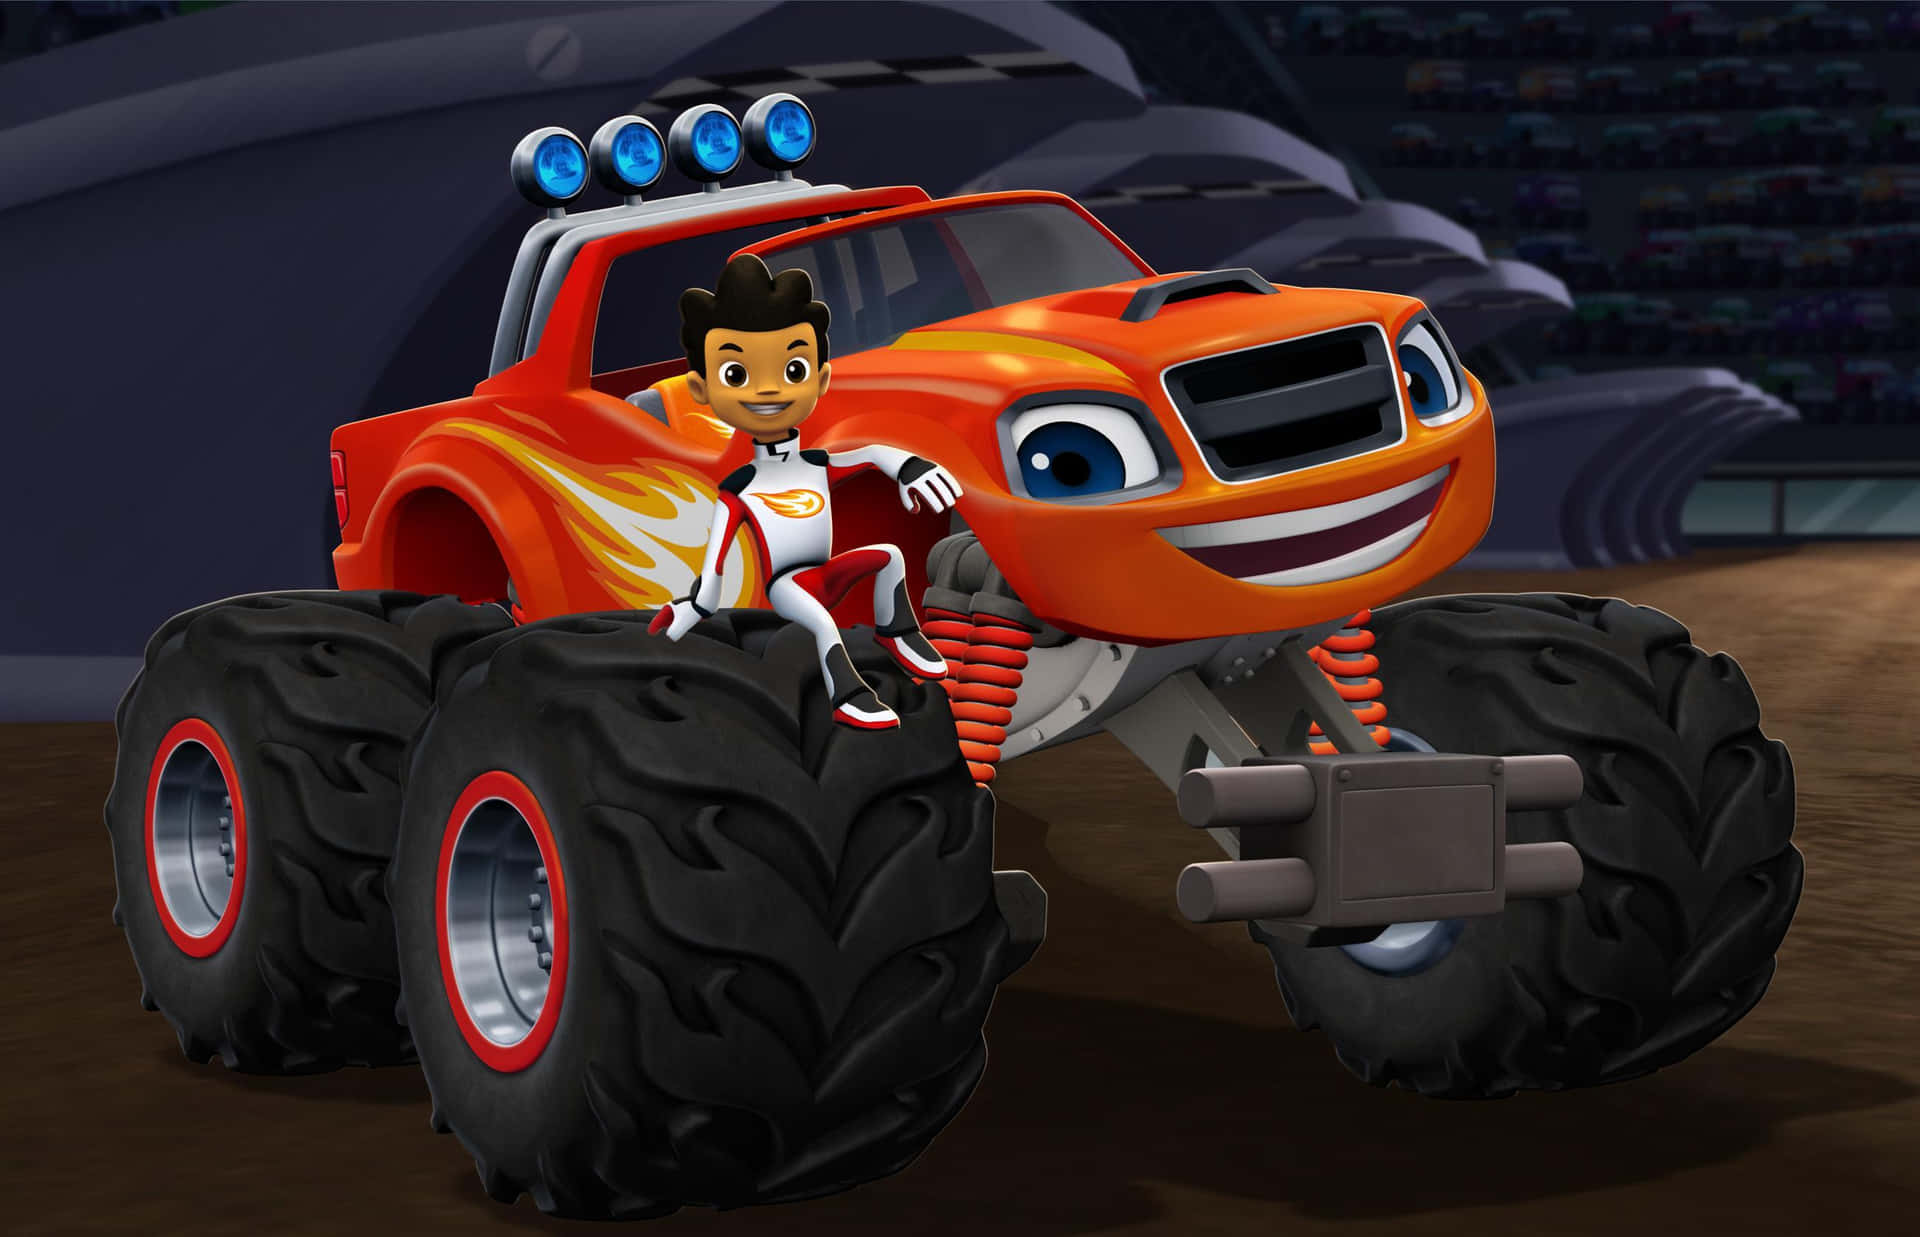 Blaze zooms around with his friends in the Monster Machines